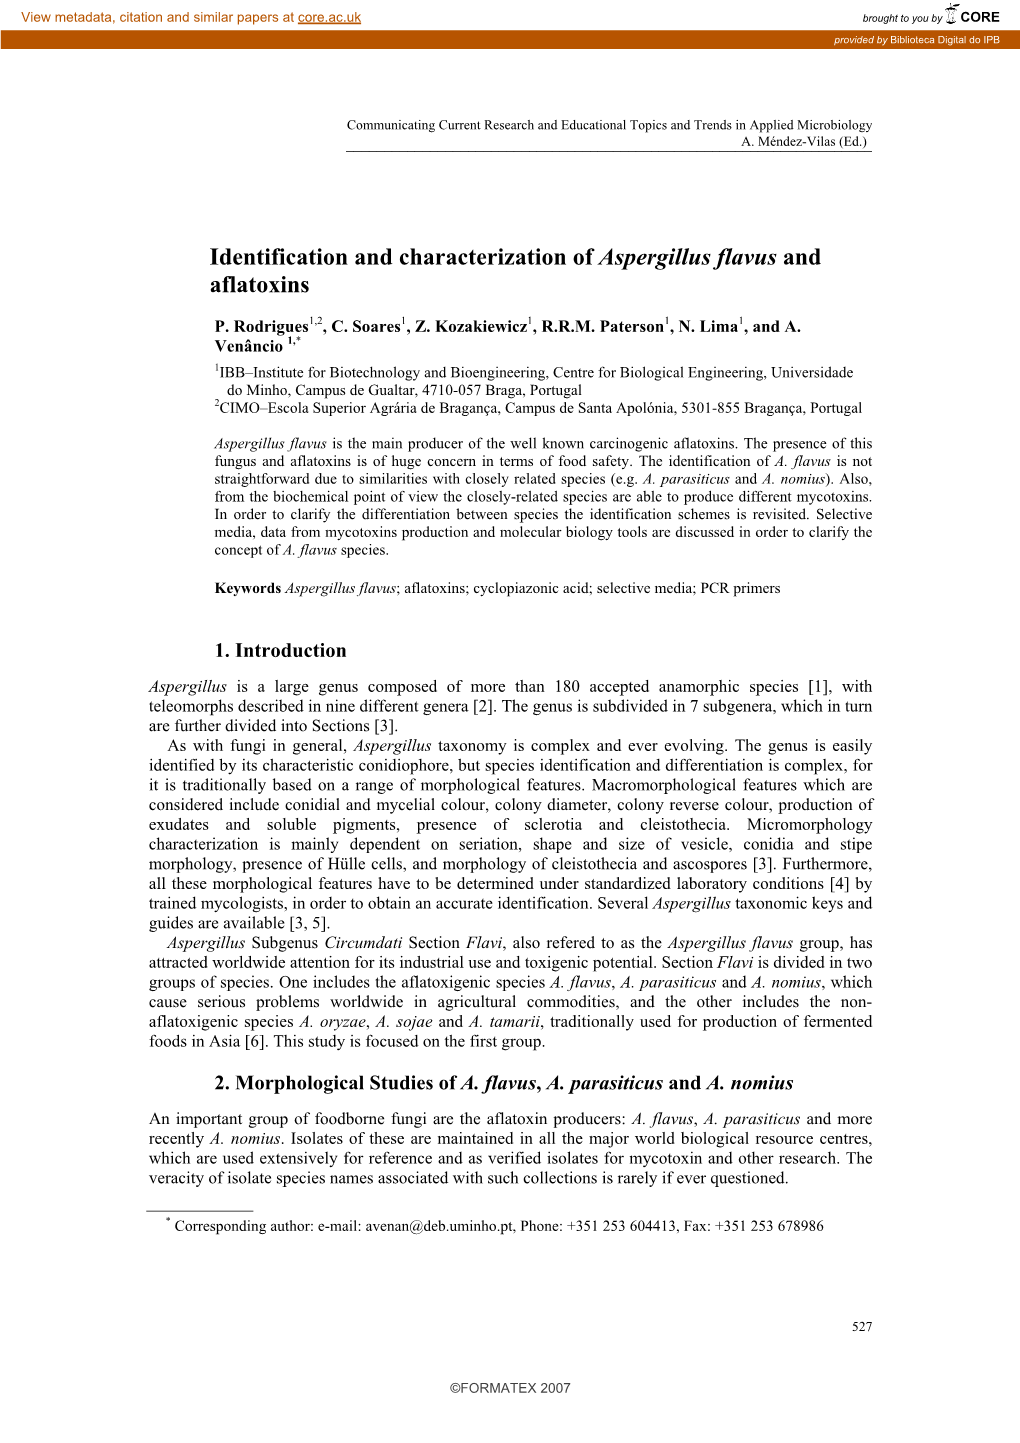 Identification and Characterization of Aspergillus Flavus and Aflatoxins